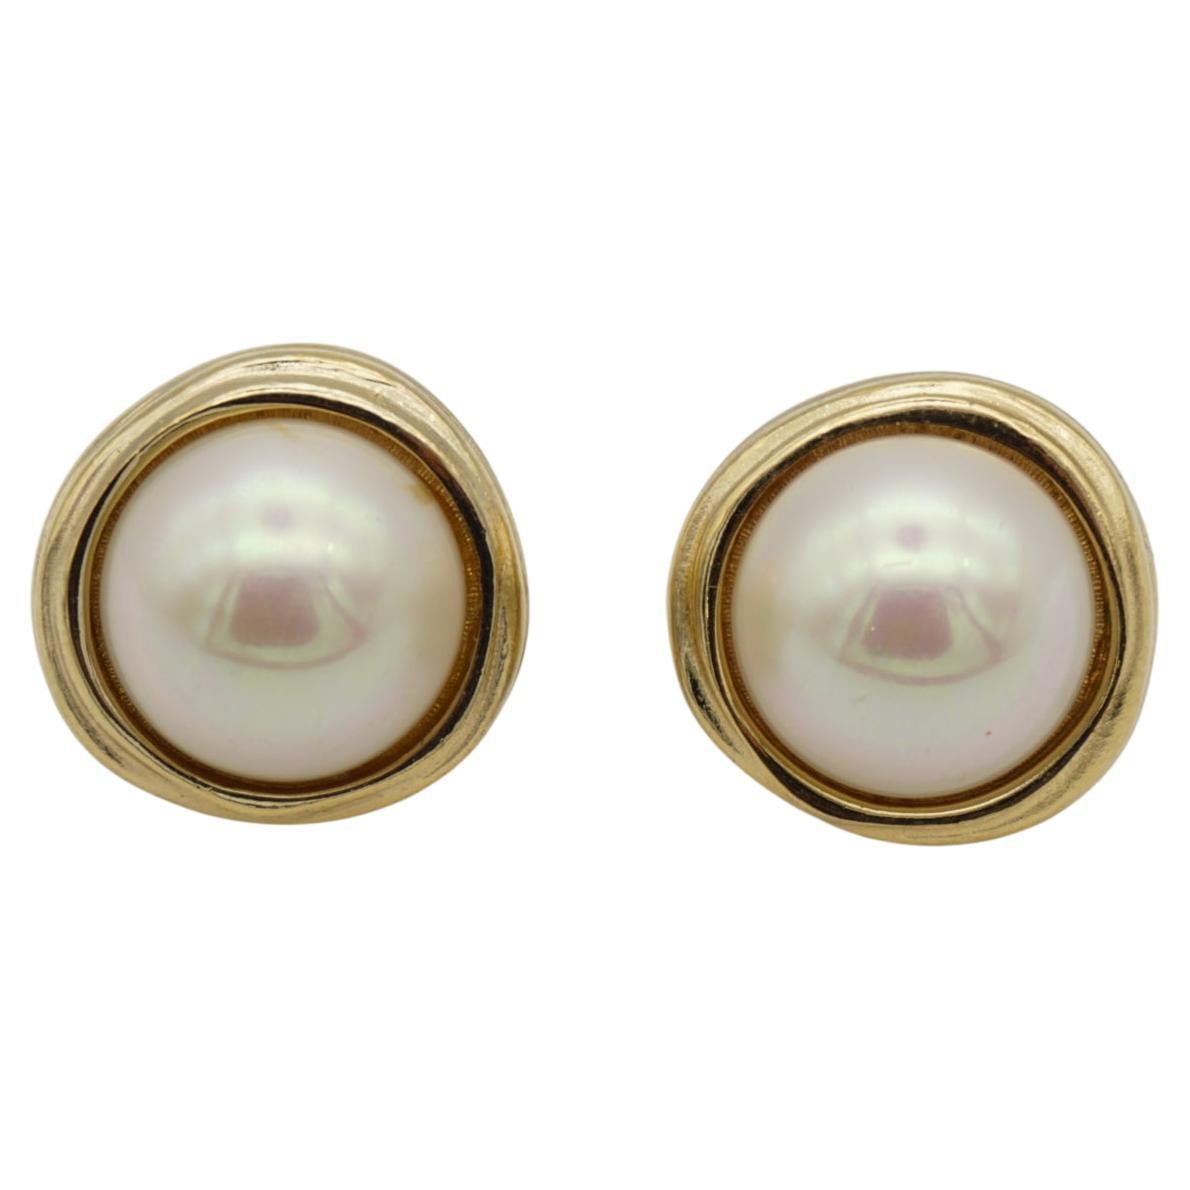 Christian Dior Vintage 1980s Irregular Large Round Faux Pearl Pierced Earrings For Sale